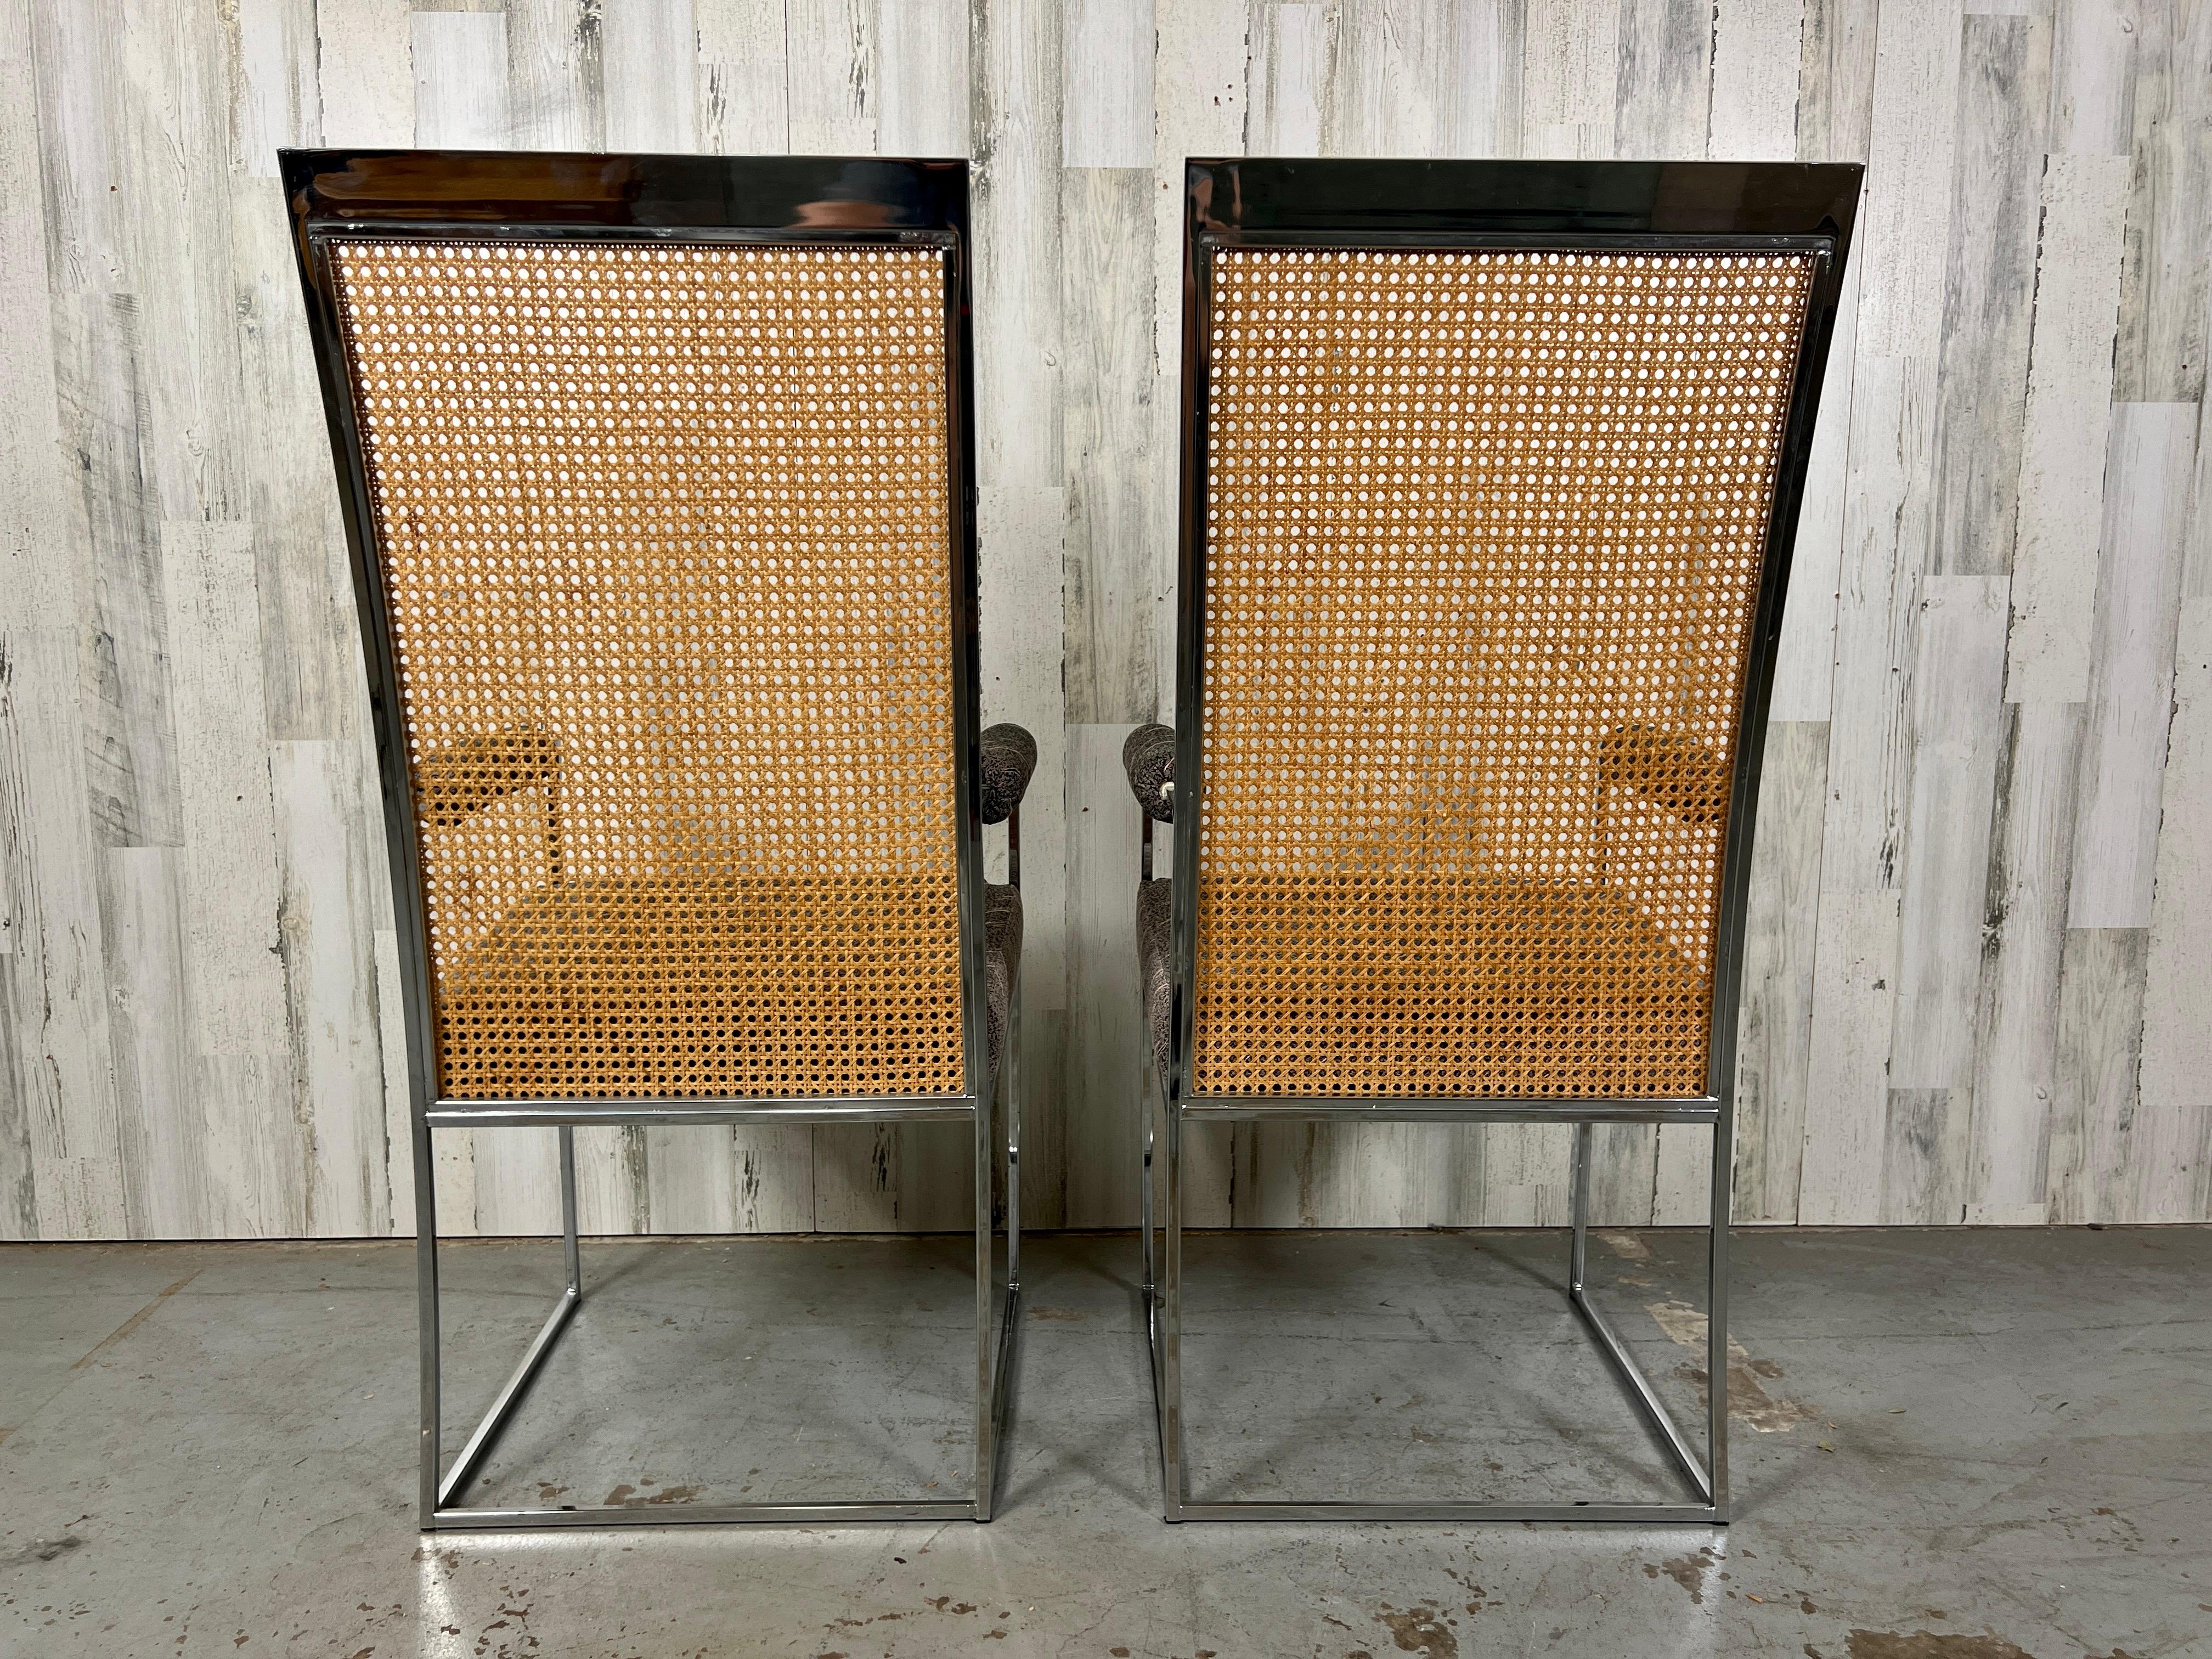 Chrome high back armchairs with cane back and original upholstery.
Deigned by Milo Baughman and manufactured by Thayer Coggin.
The fabric is very clean or new upholstery may be desired.